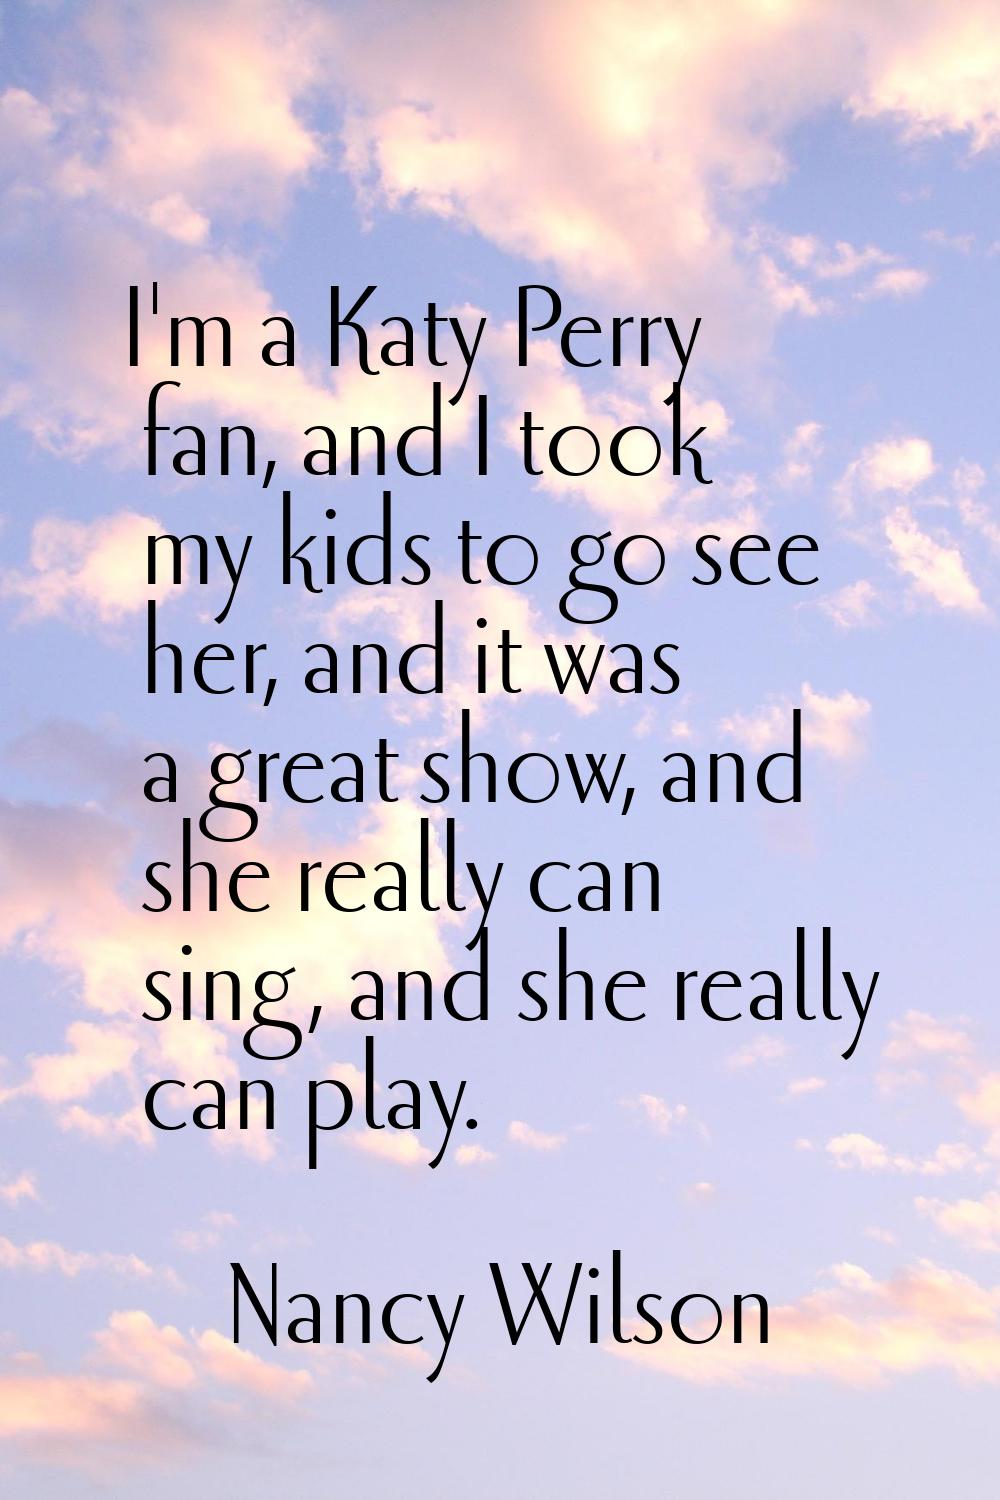 I'm a Katy Perry fan, and I took my kids to go see her, and it was a great show, and she really can